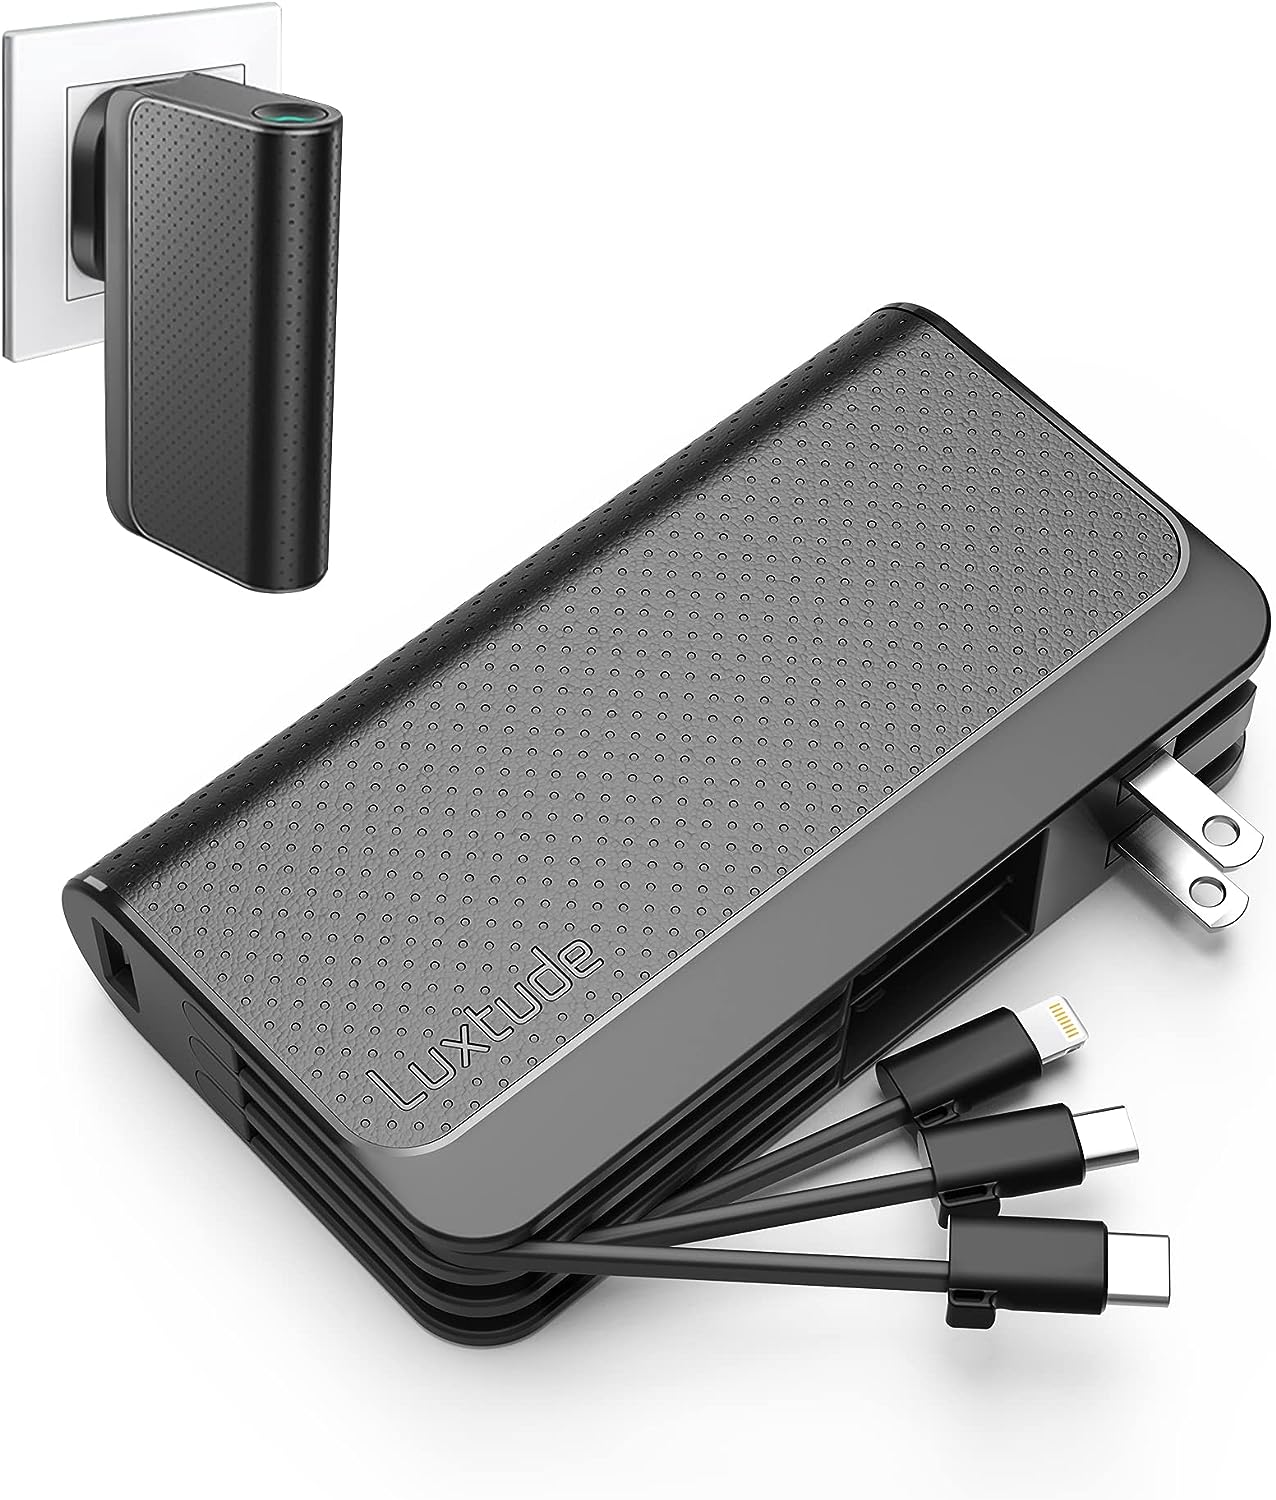 Luxtude Portable Phone Charger Built-in Wall Plug, [...]